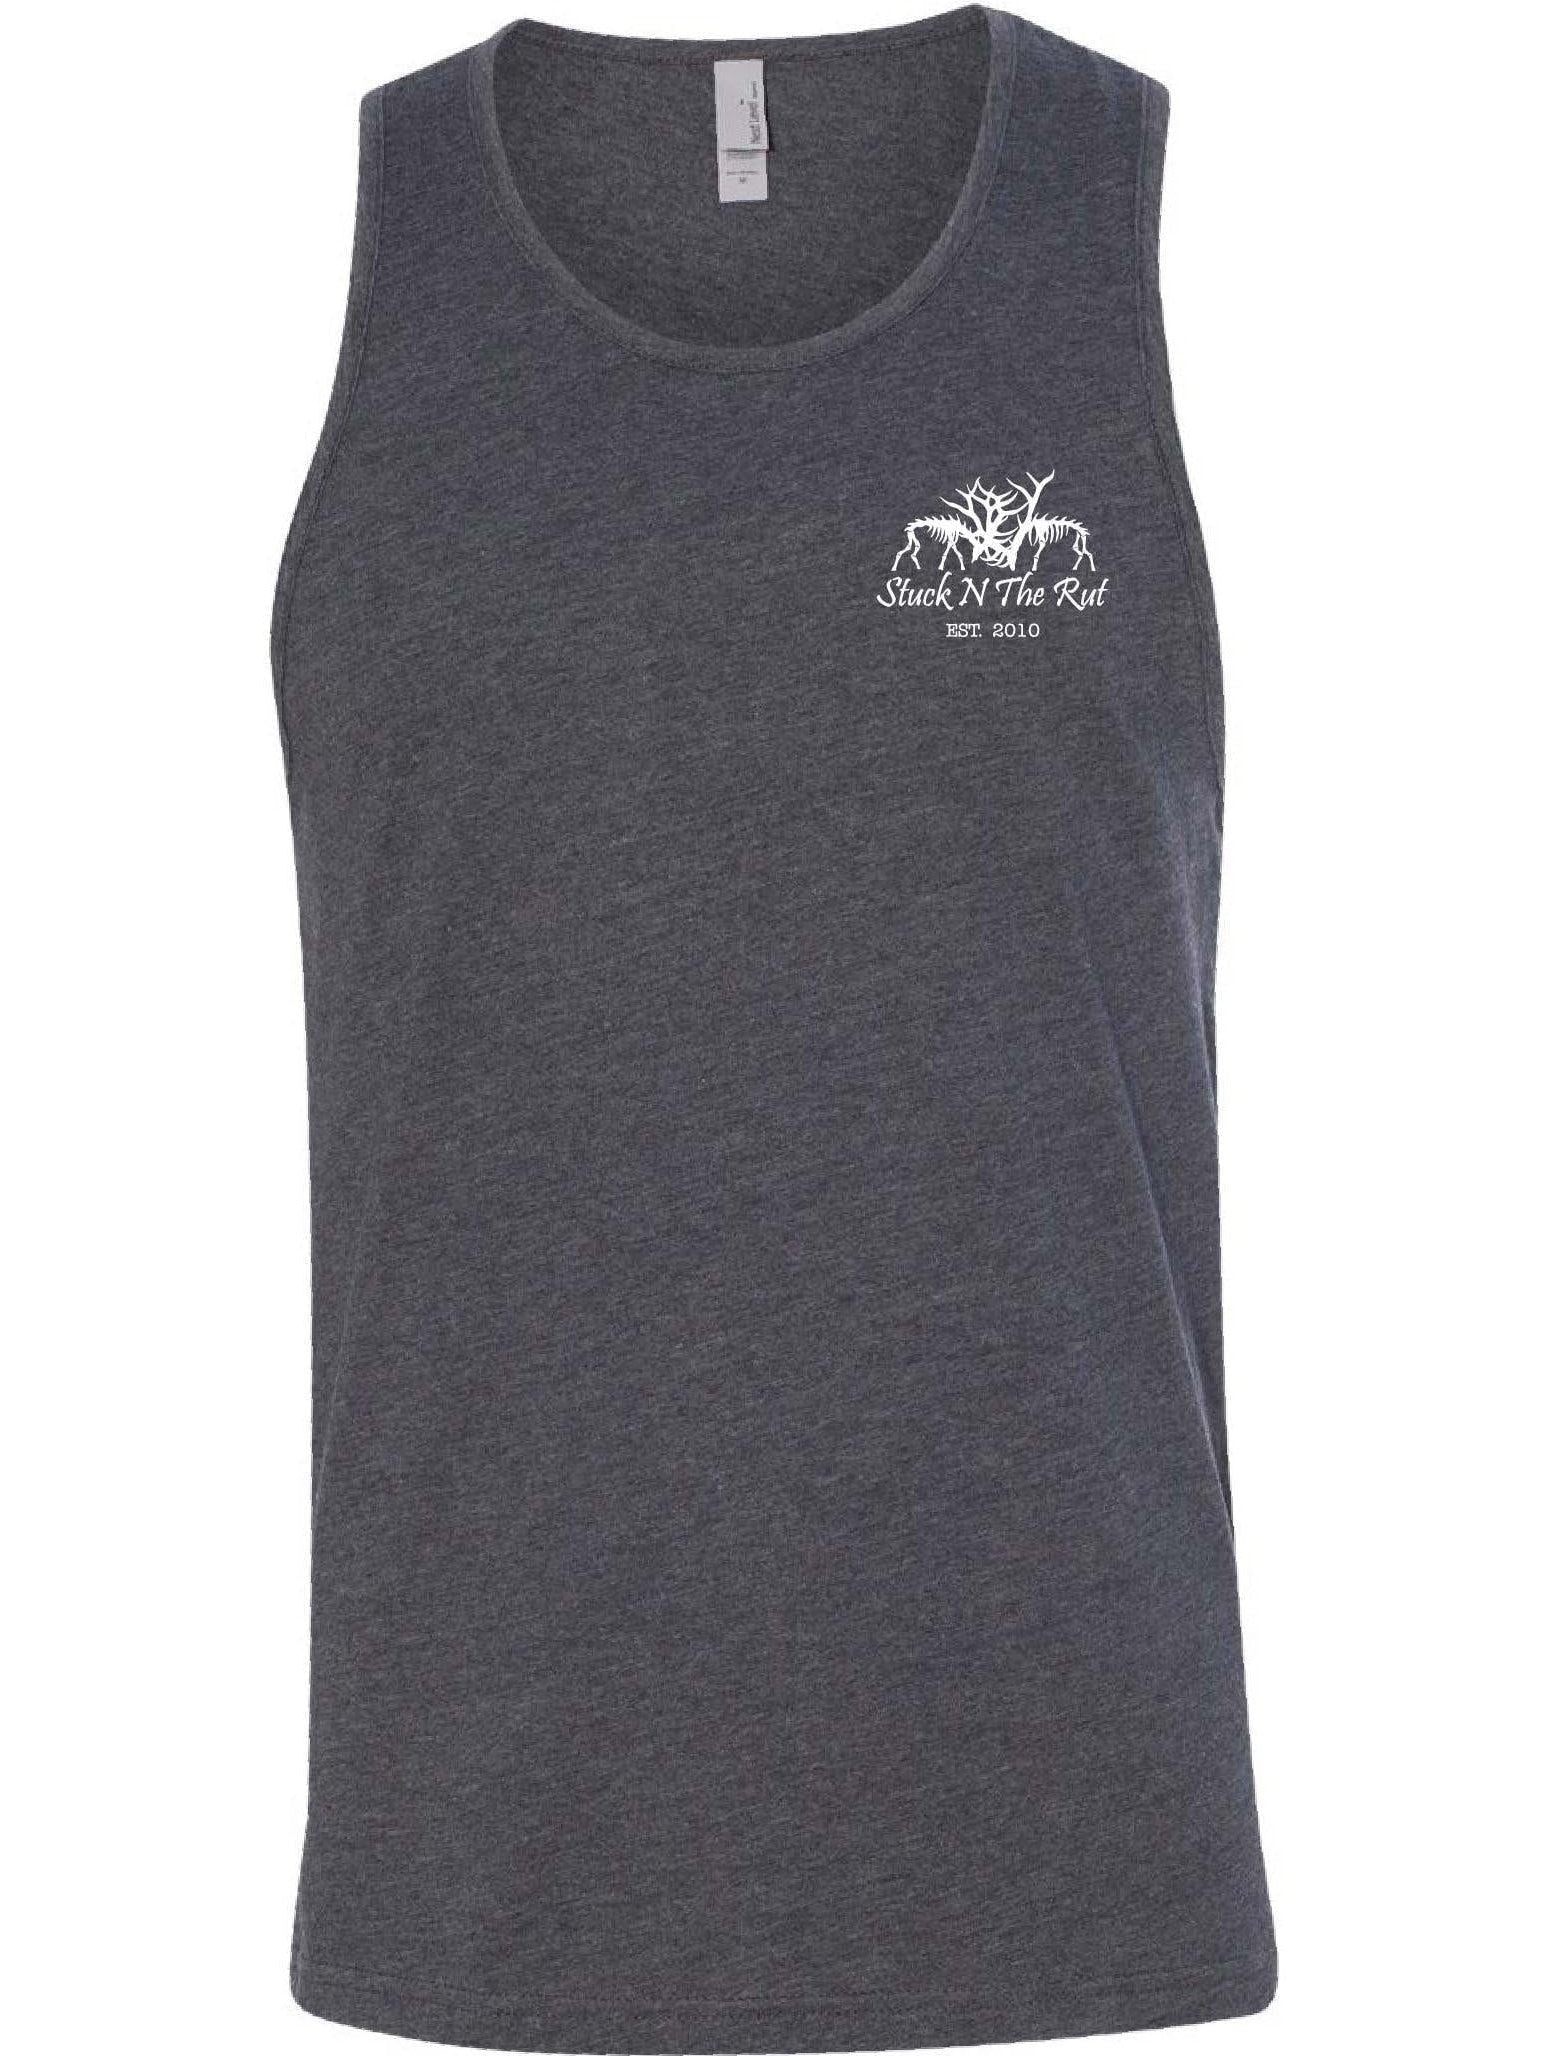 SNTR - Bro Tank - Clearance